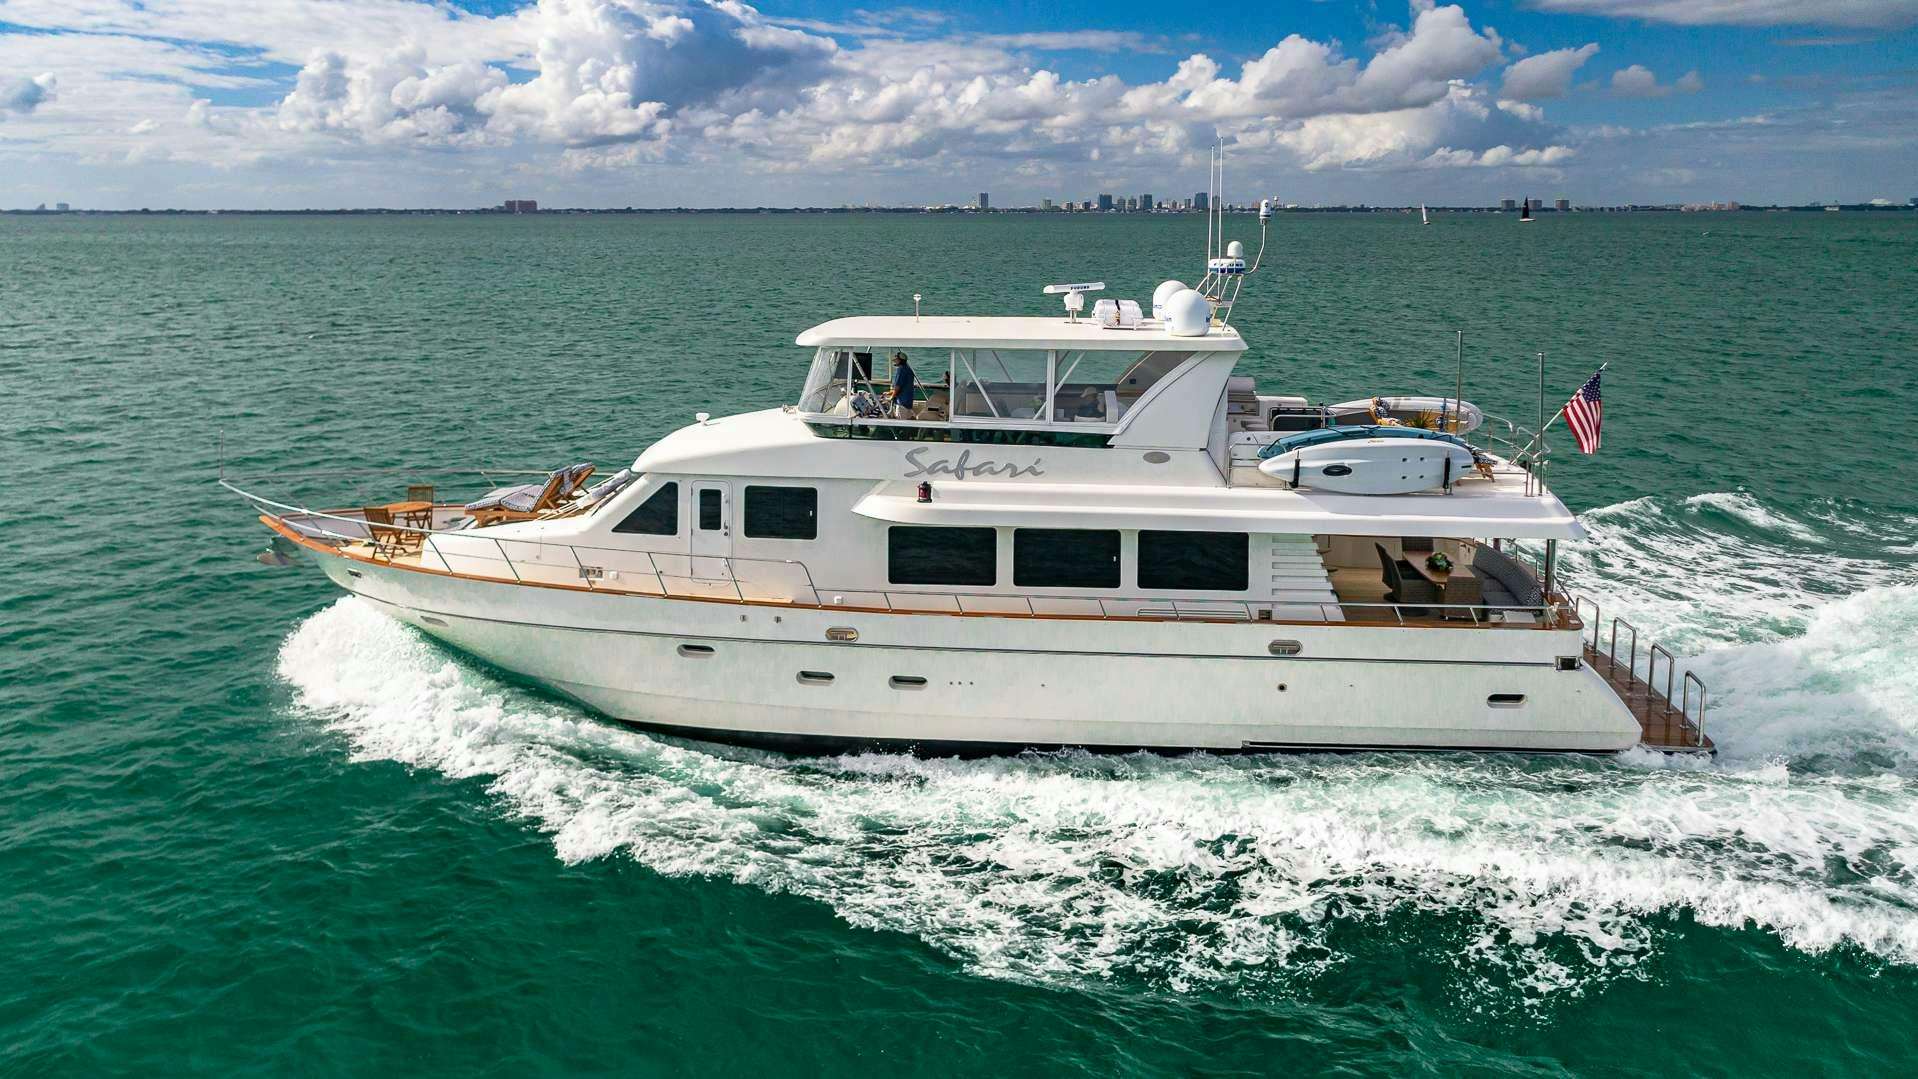 Watch Video for SAFARI Yacht for Charter